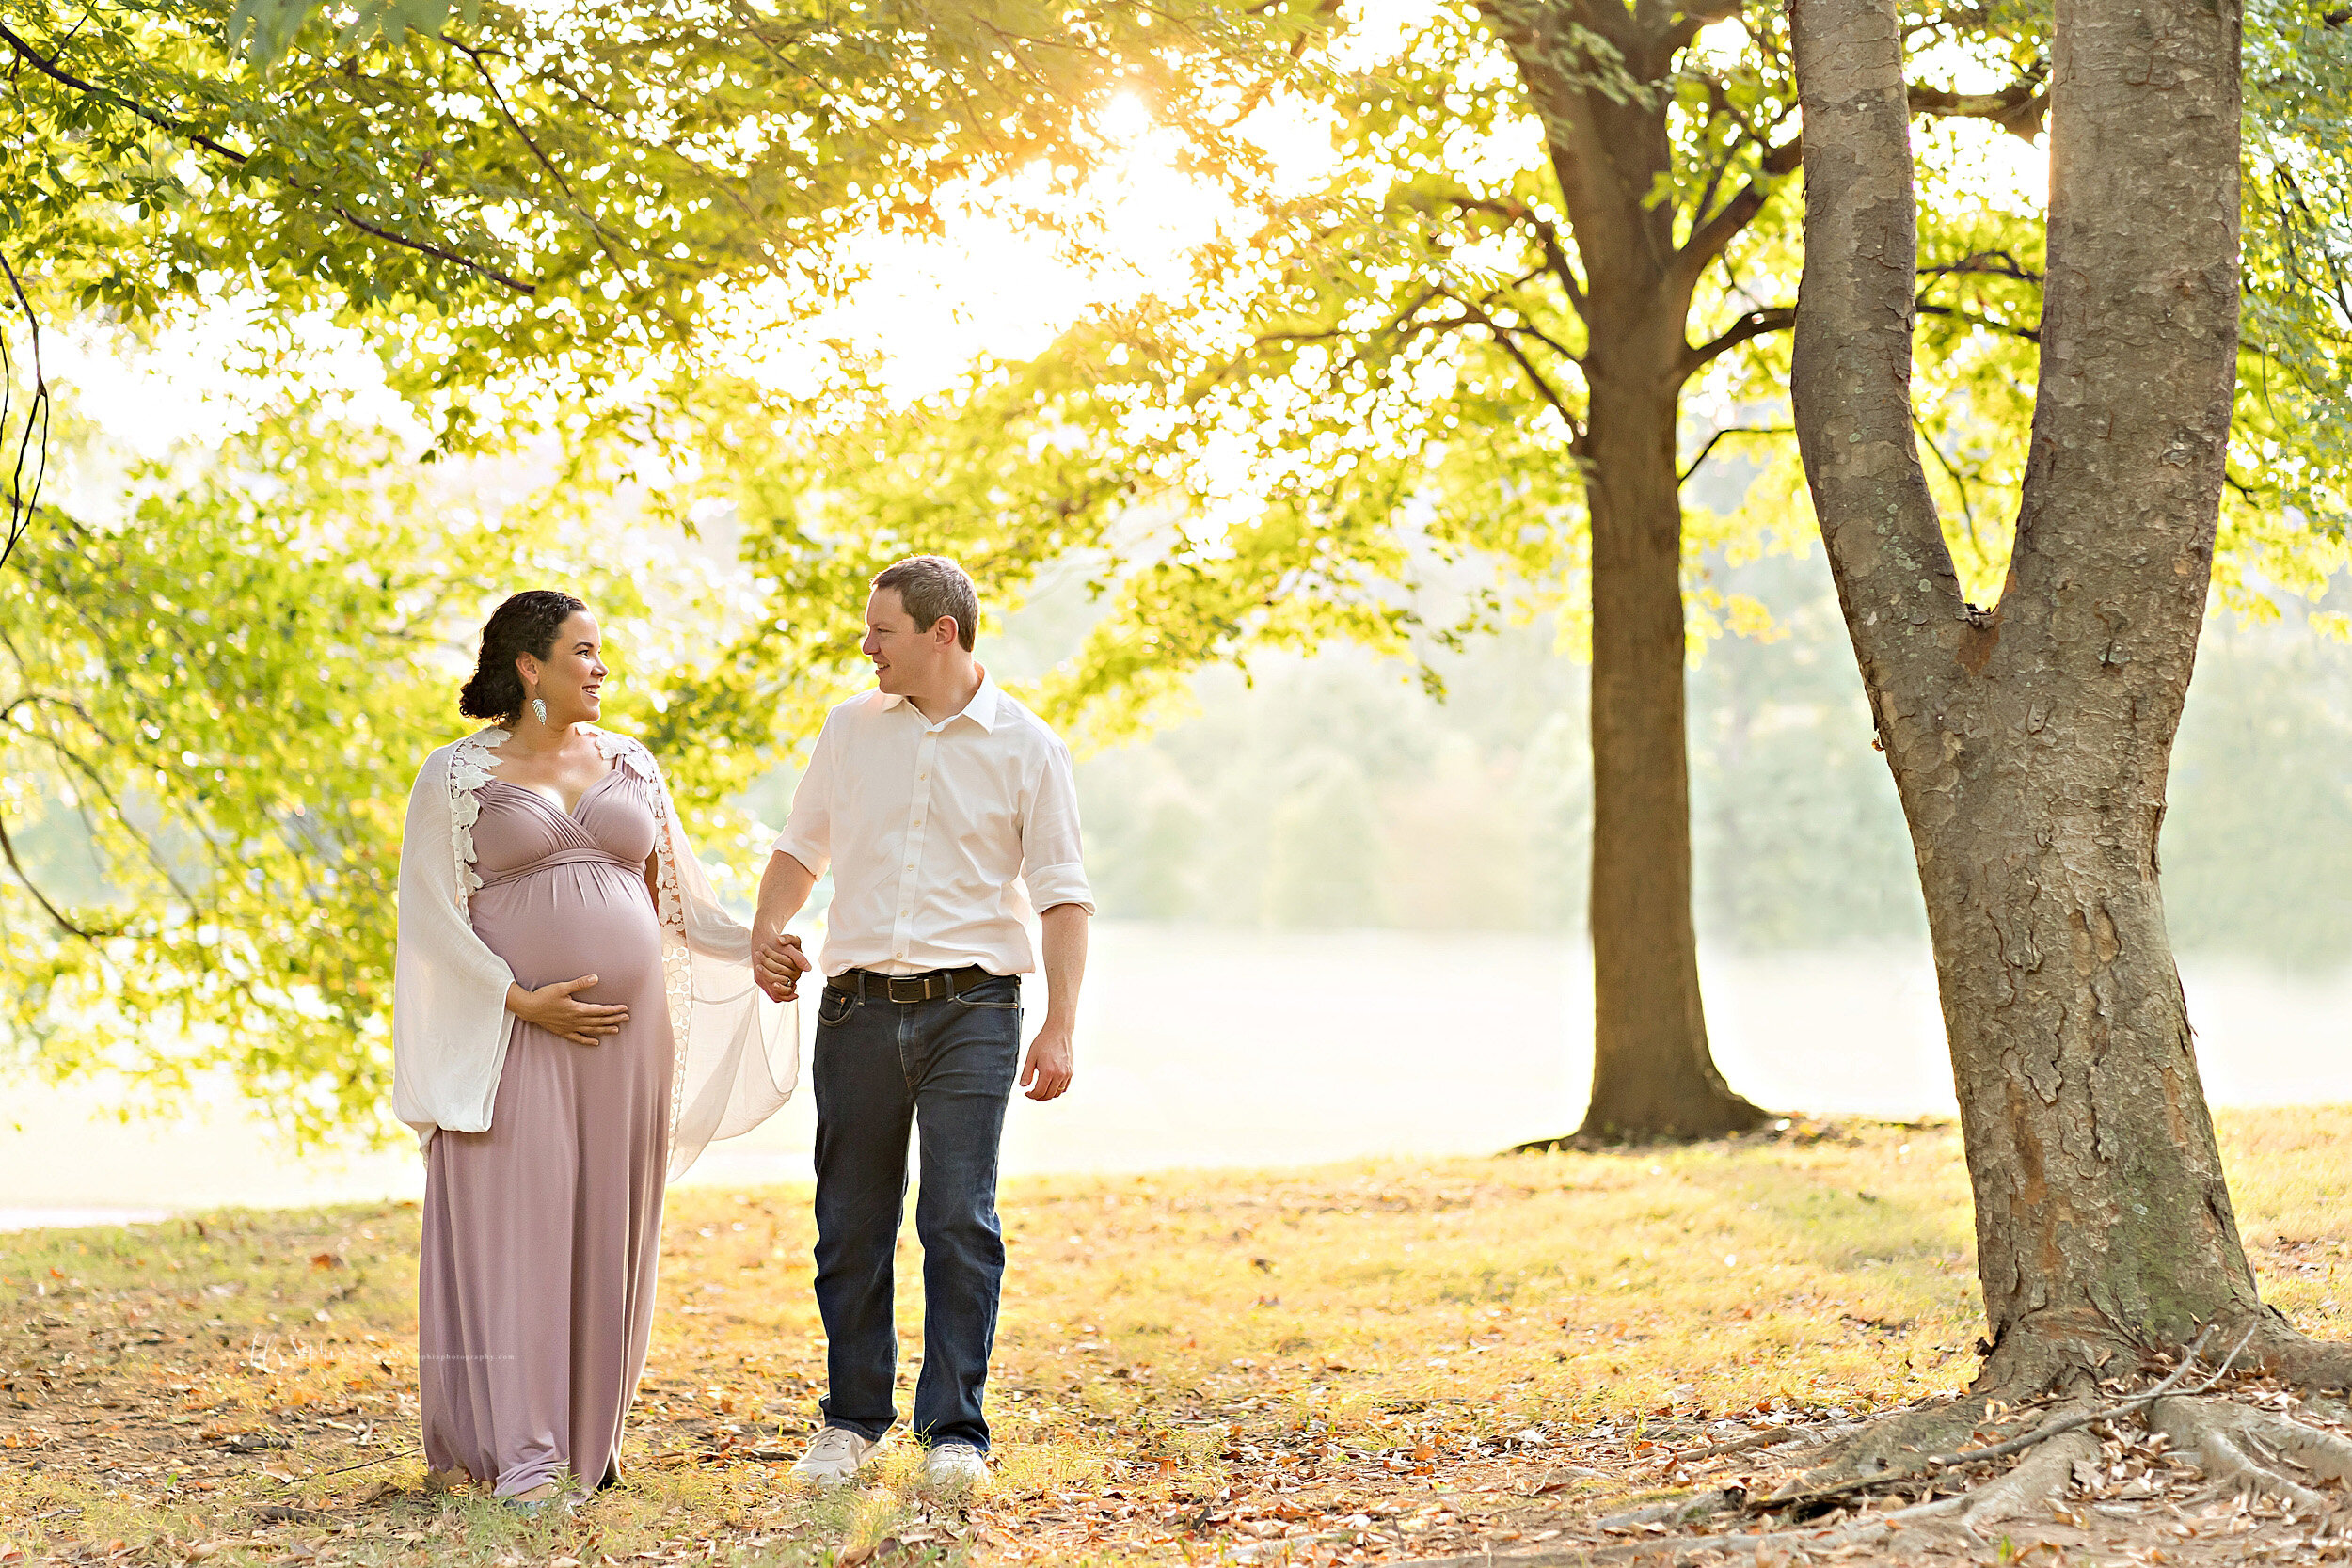 atlanta-decatur-old-fourth-ward-poncey-highlands-candler-park-grant-park-brookhaven-buckhead-virginia-highlands-west-end-decatur-lily-sophia-photography-family-maternity-park-session_2412.jpg